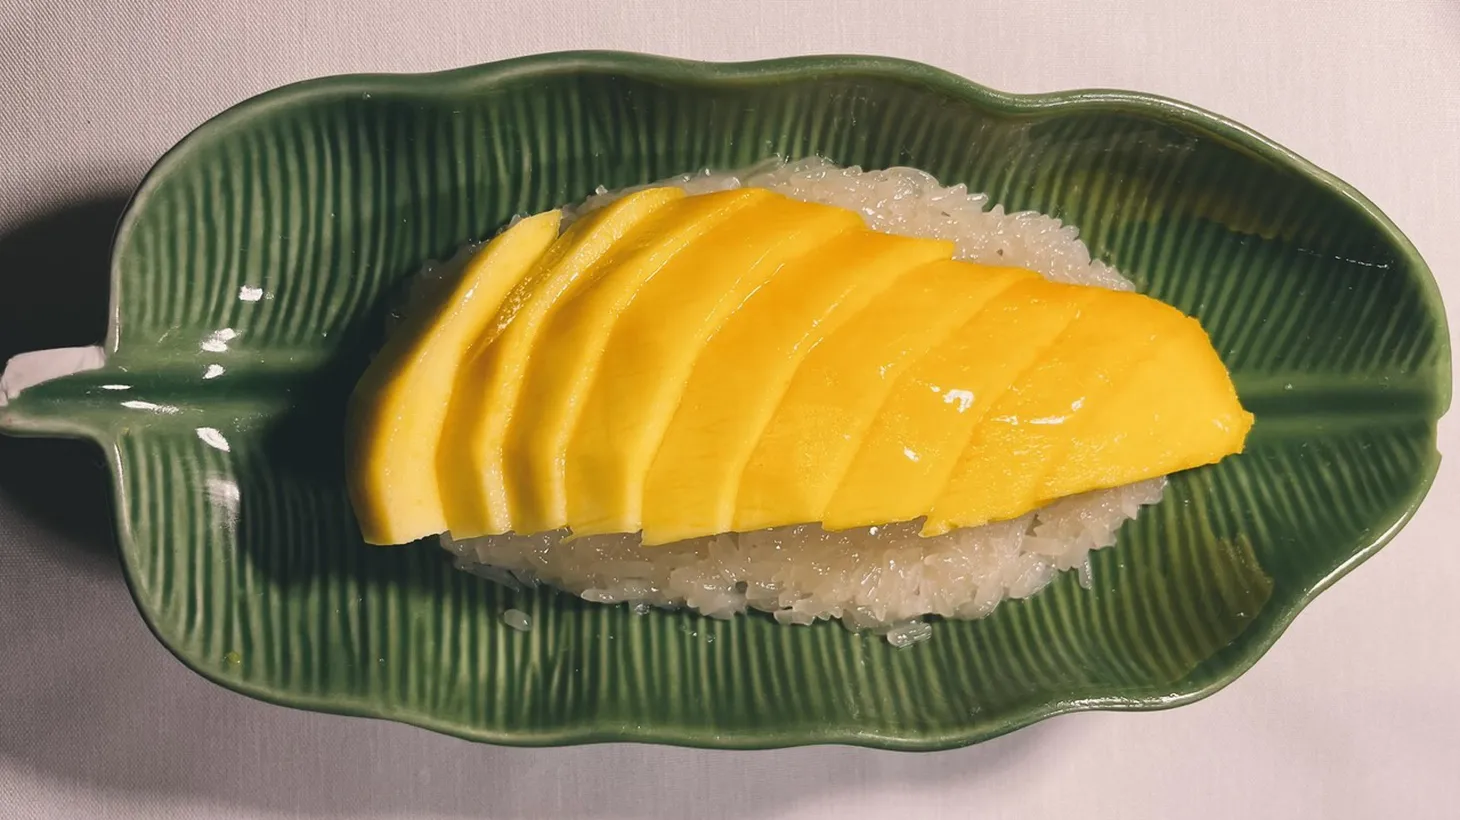 Justin Pichetrungsi had a special knife made for his mother who, along with his auntie, makes traditional mango sticky rice at Anajak Thai.